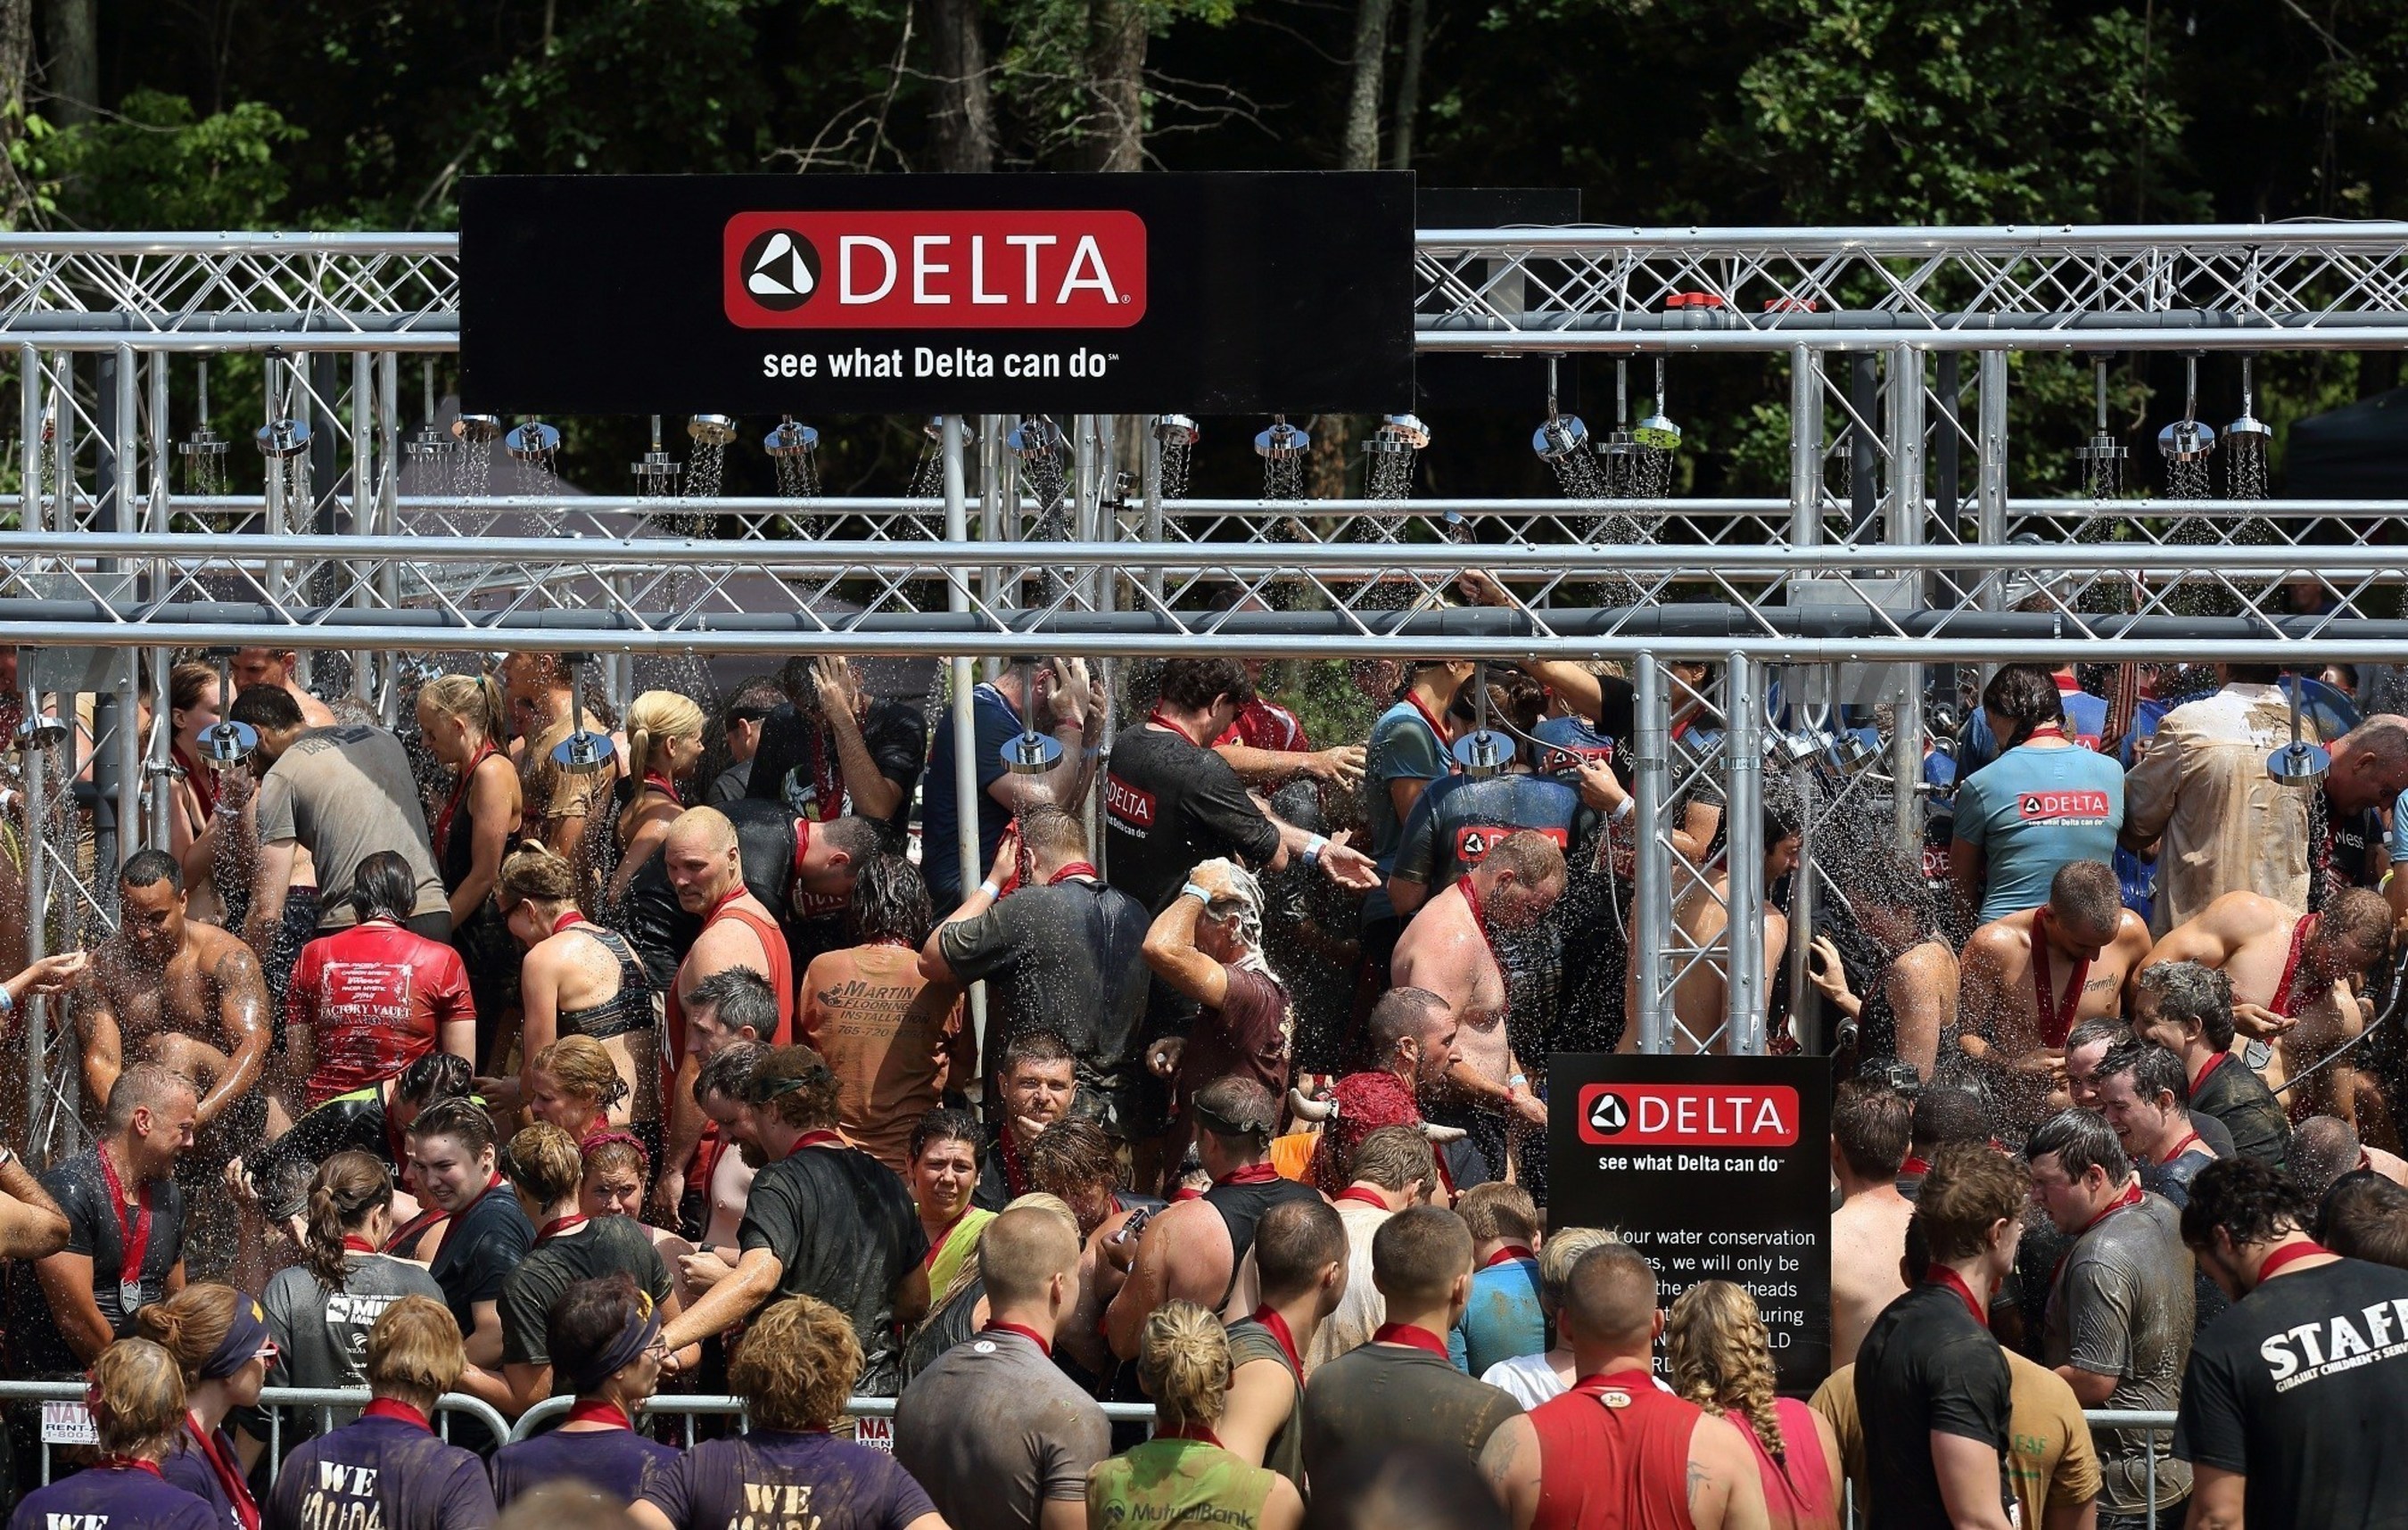 Delta Faucet earns GUINNESS WORLD RECORDS title for most people showering simultaneously at the Indiana Warrior Dash event on Saturday, June 27, 2015 in Crawfordsville, Ind. (Photo by Steven Mitchell/AP Images for Delta Faucet Company)